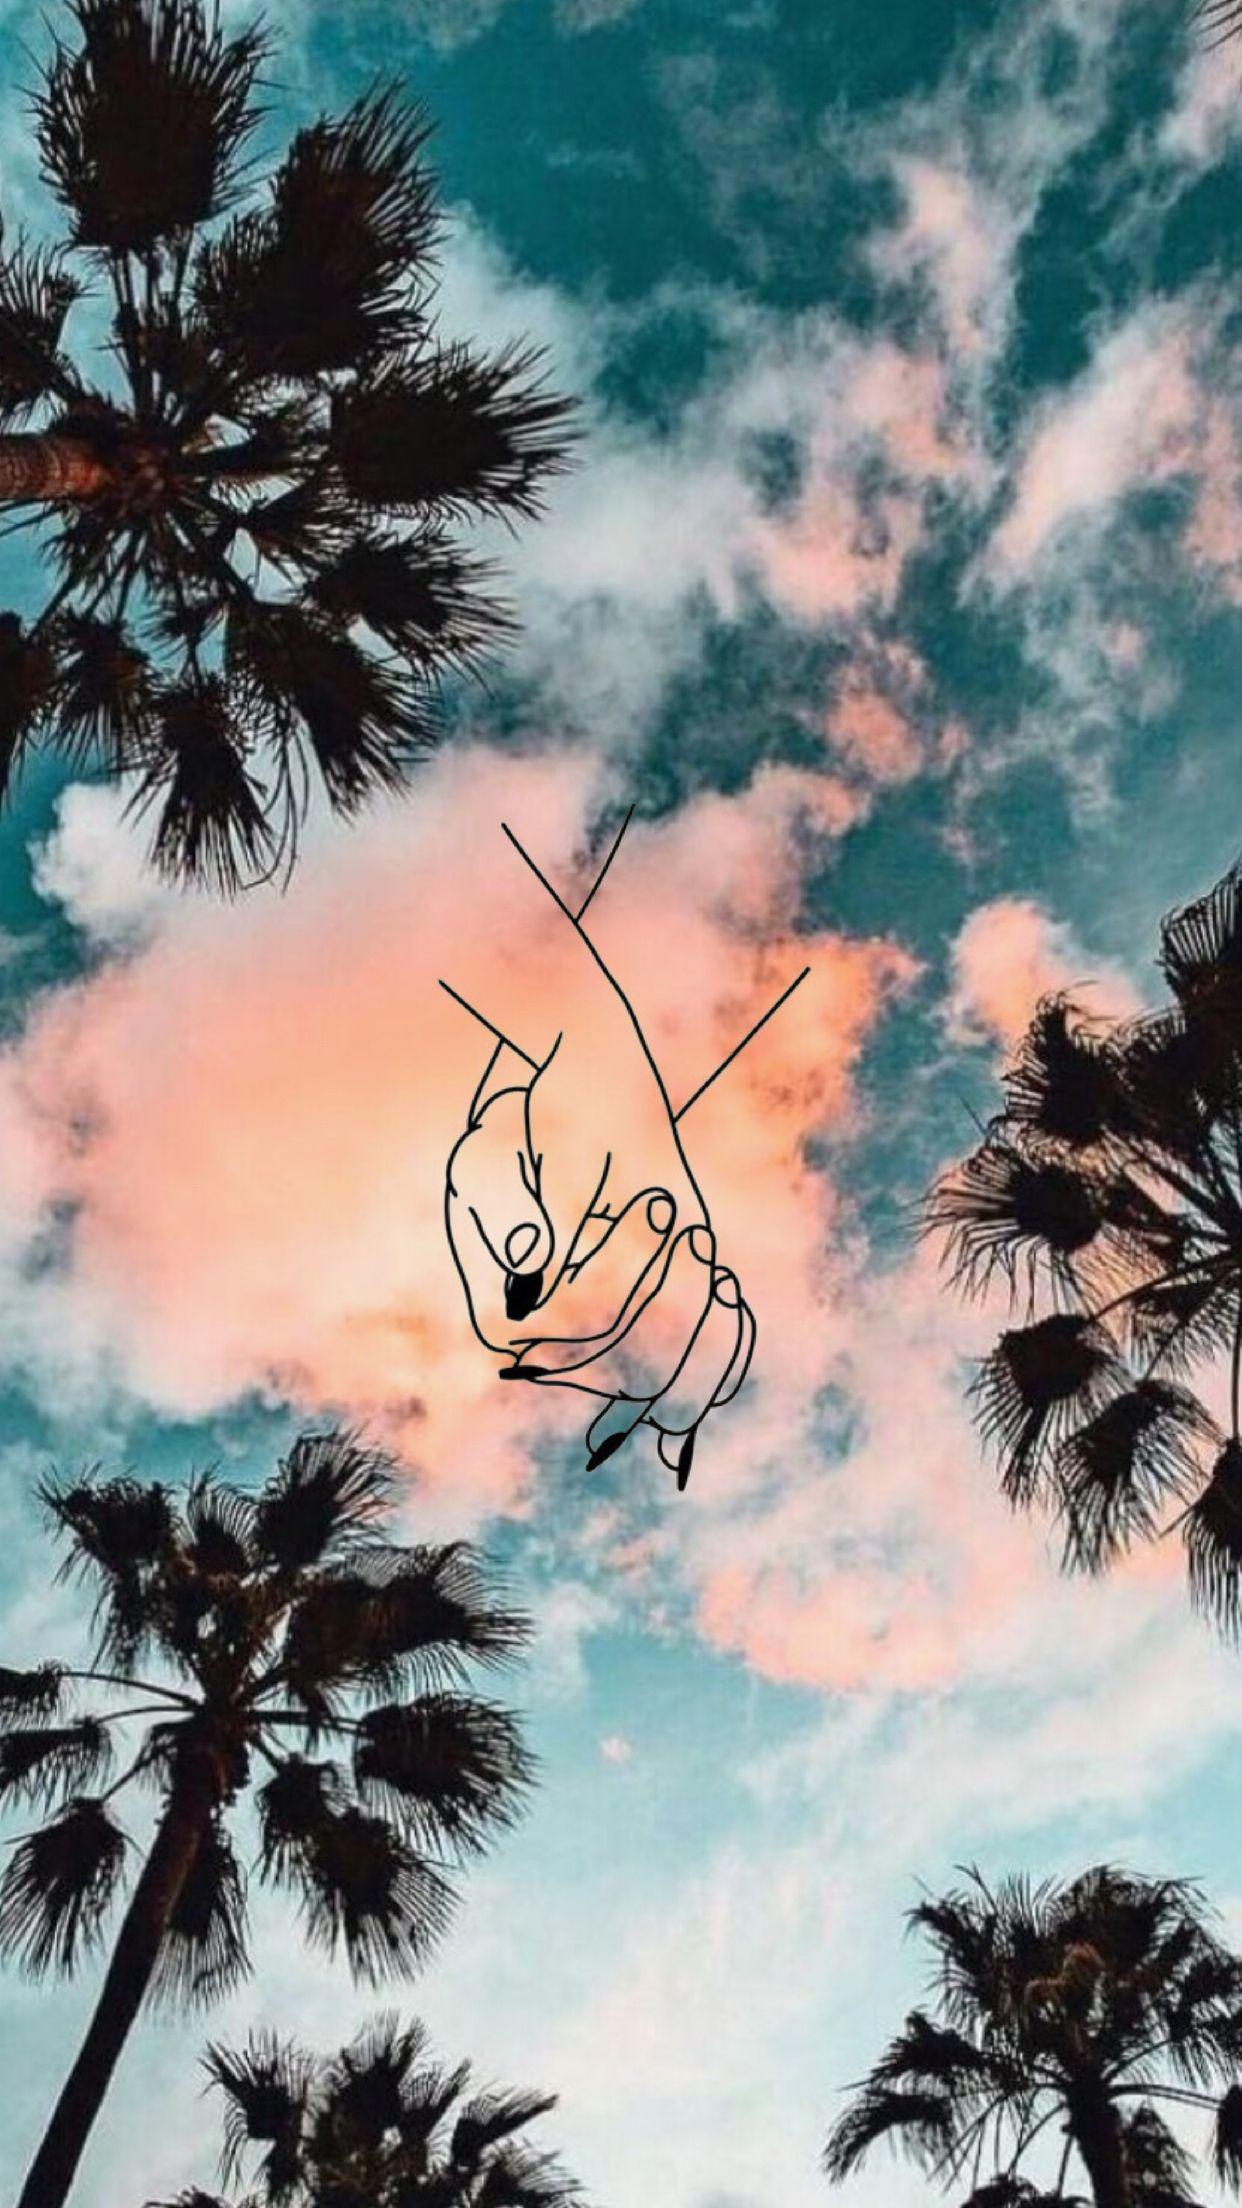 IPhone wallpaper of a sky with palm trees and a hand drawn cloud - Beautiful, palm tree